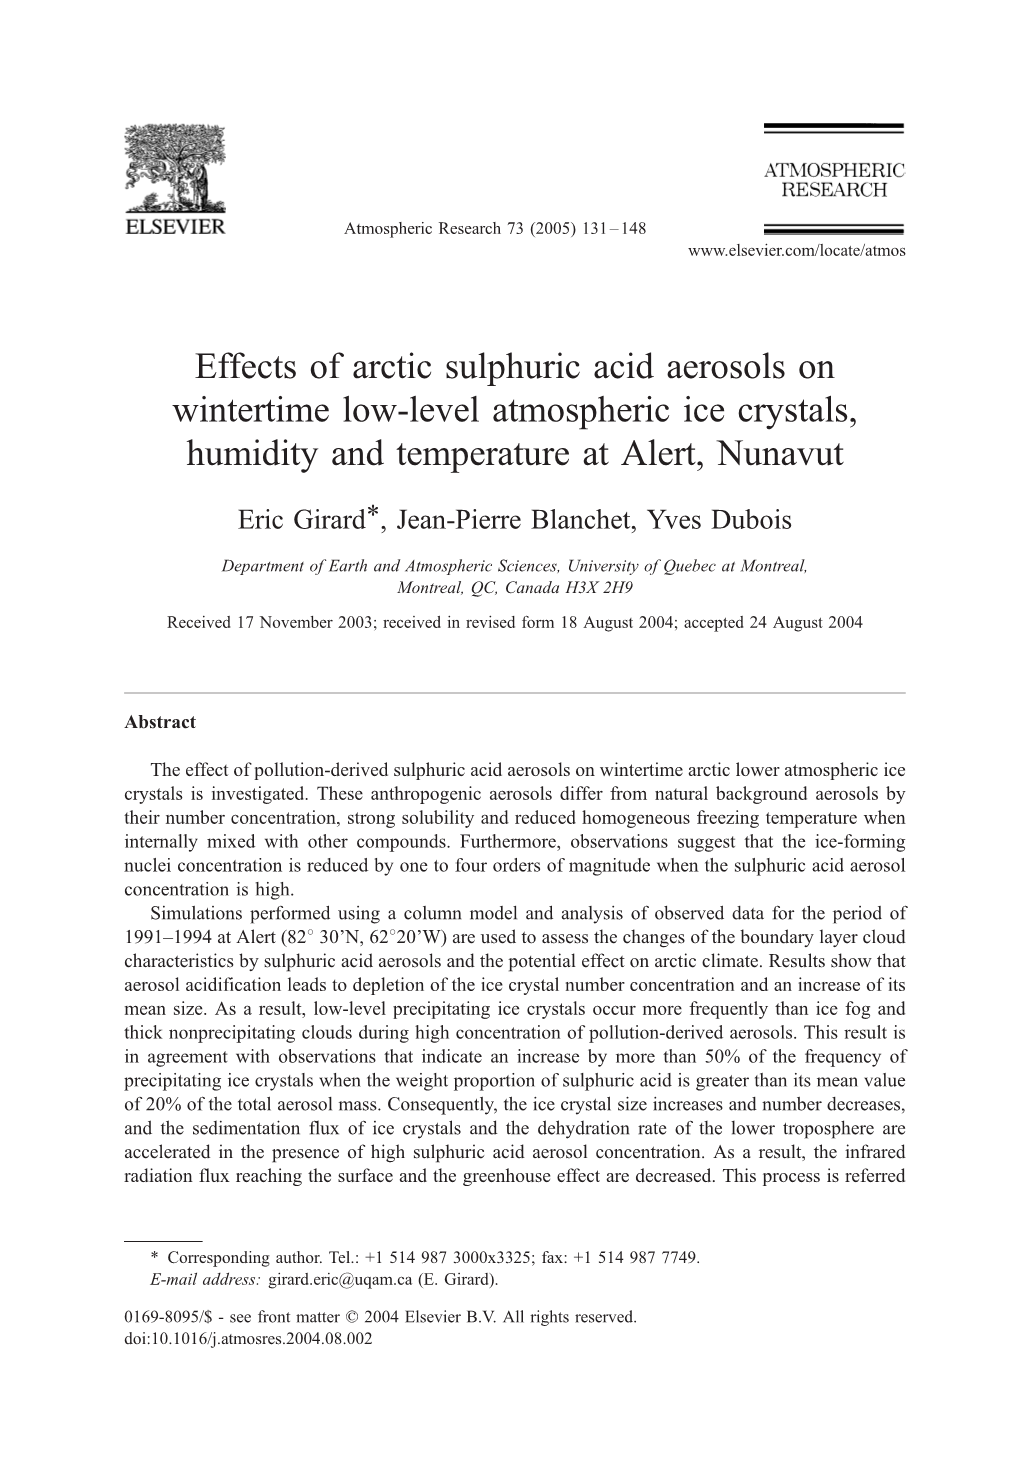 Effects of Arctic Sulphuric Acid Aerosols on Wintertime Low-Level Atmospheric Ice Crystals, Humidity and Temperature at Alert, Nunavut